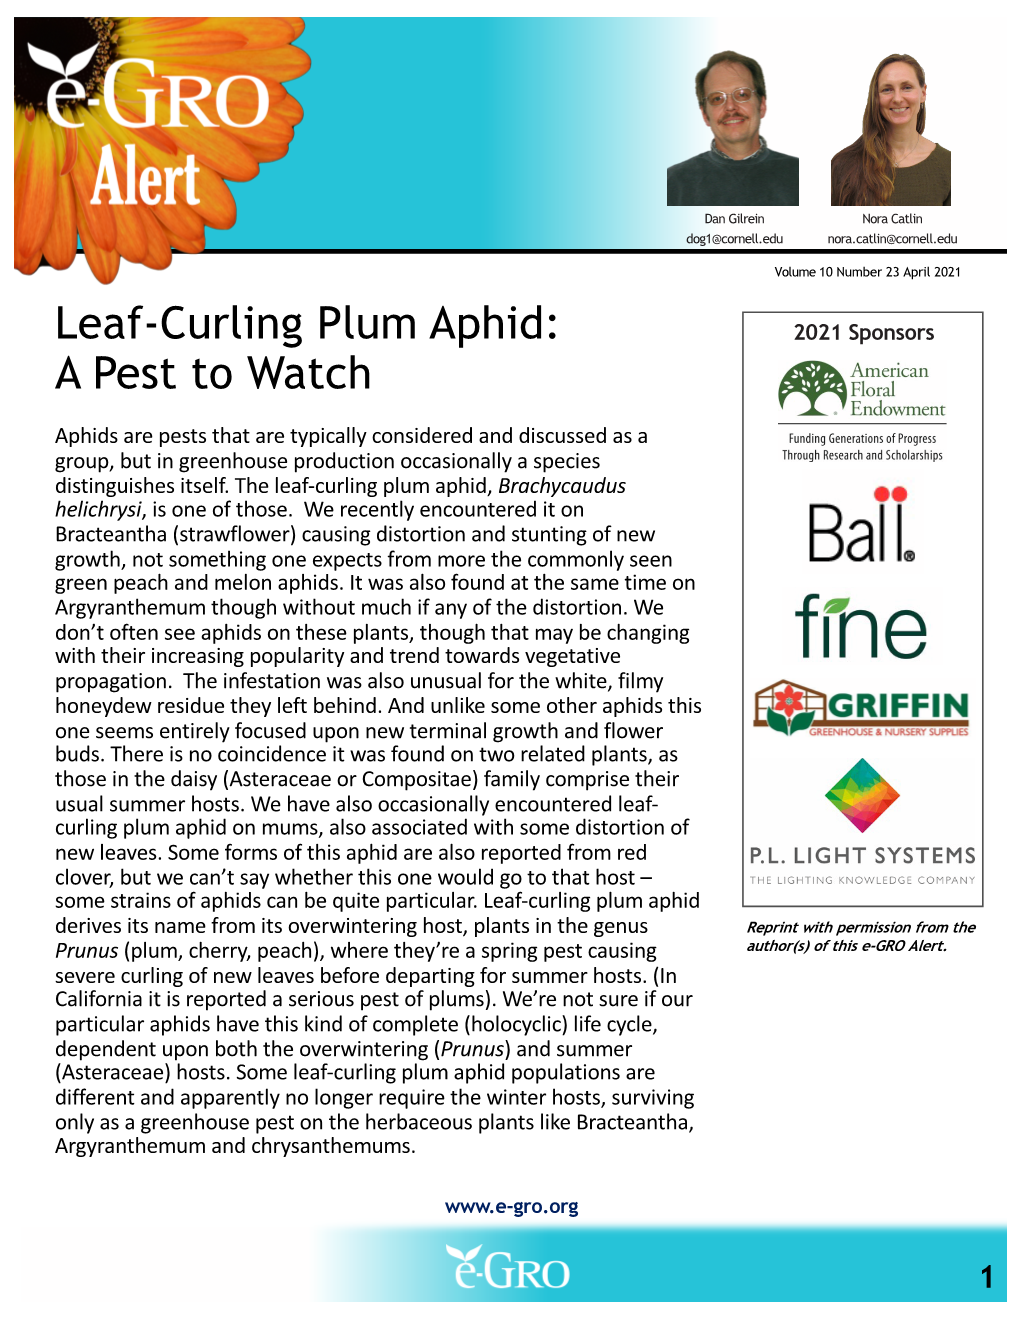 Leaf-Curling Plum Aphid: 2021 Sponsors a Pest to Watch